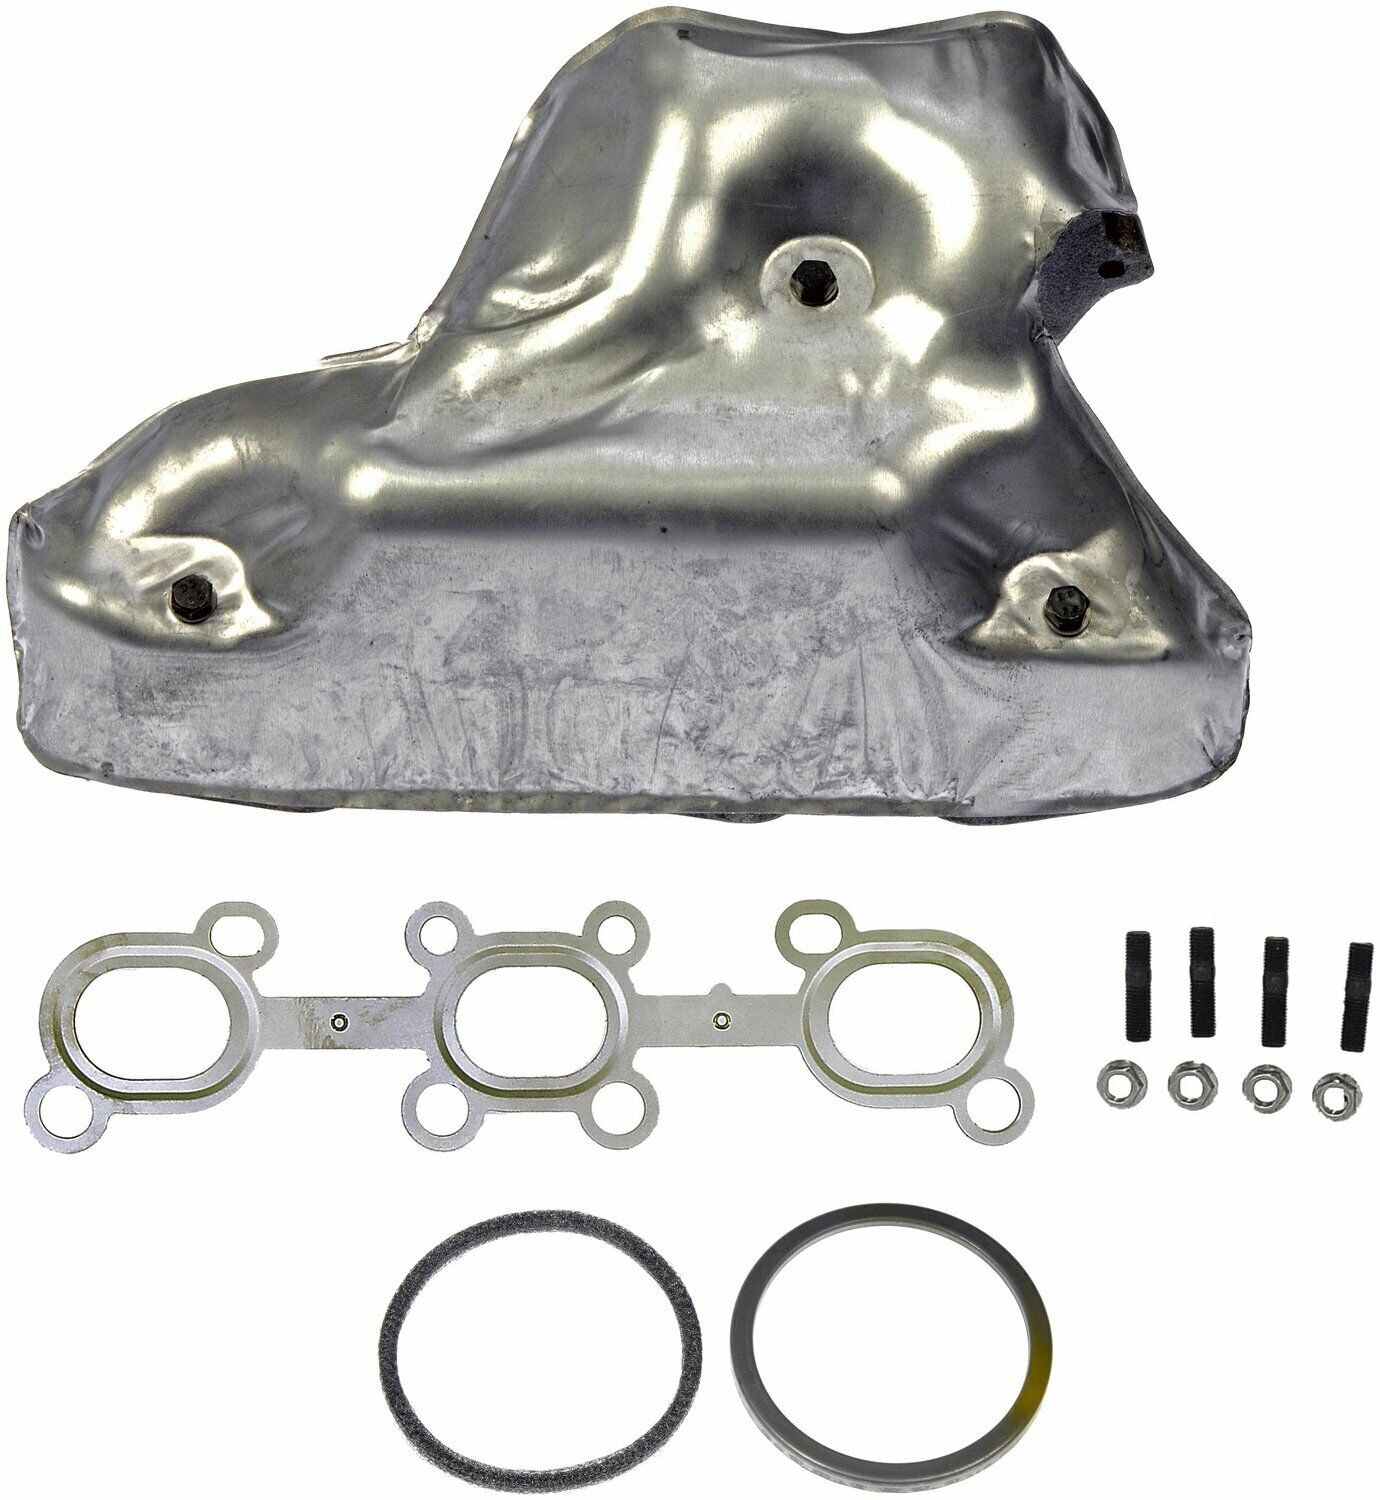 Exhaust Manifold Front Fits 2002-2008 Nissan Maxima Dorman 903YD79